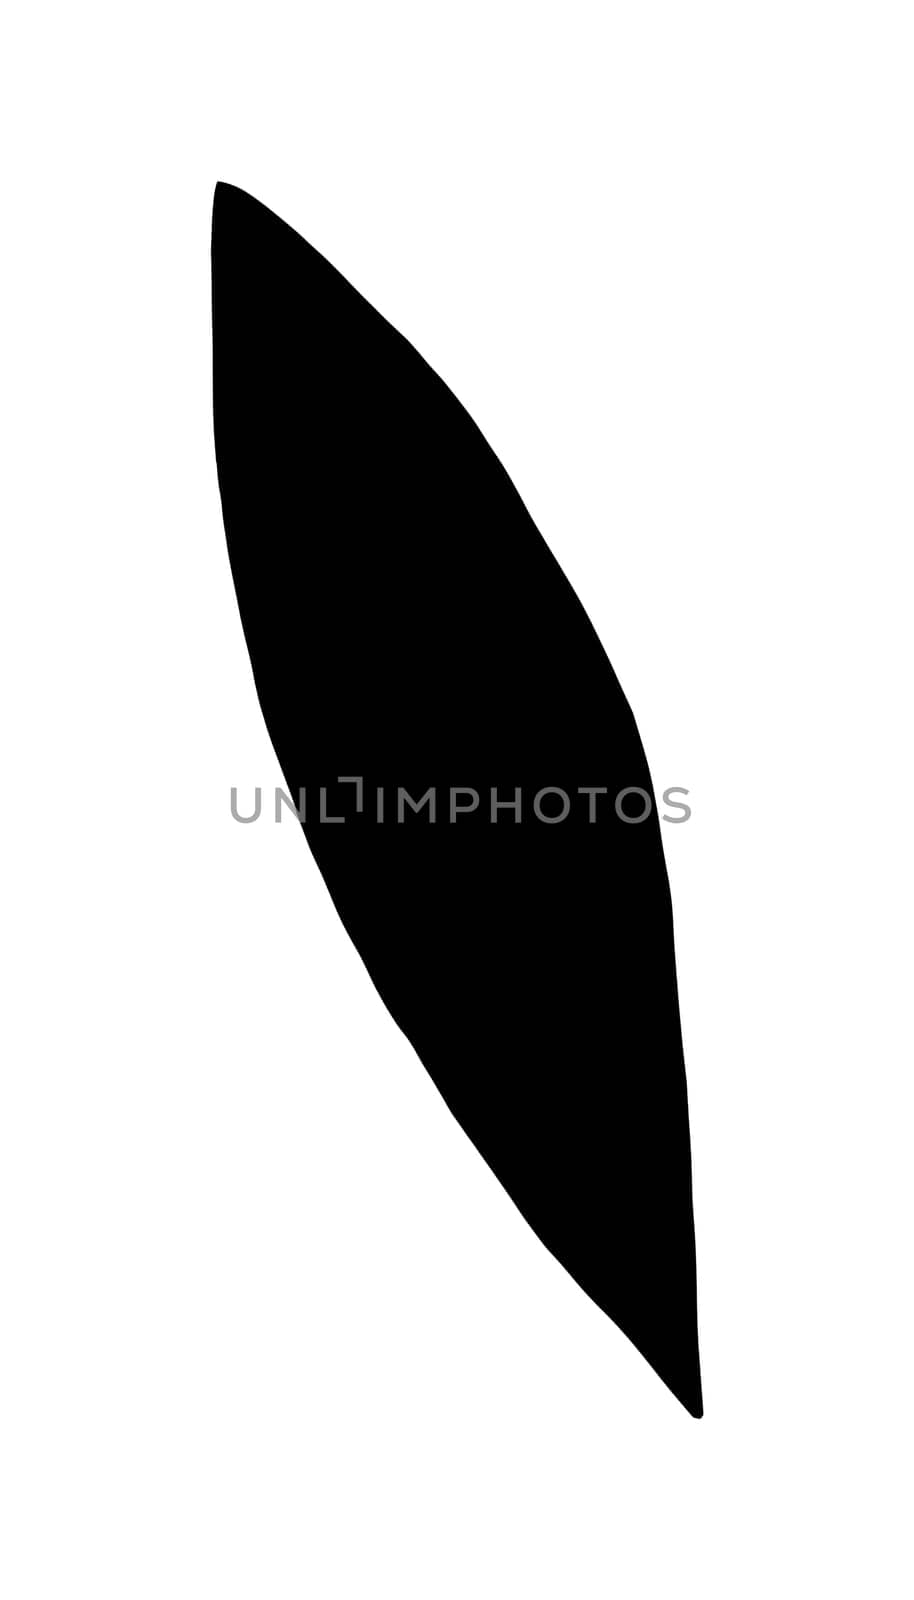 Hand Drawn Flower Leaf Silhouette. Black Floral Leaf Illustration. Plant Silhouette Isolated on White Background.